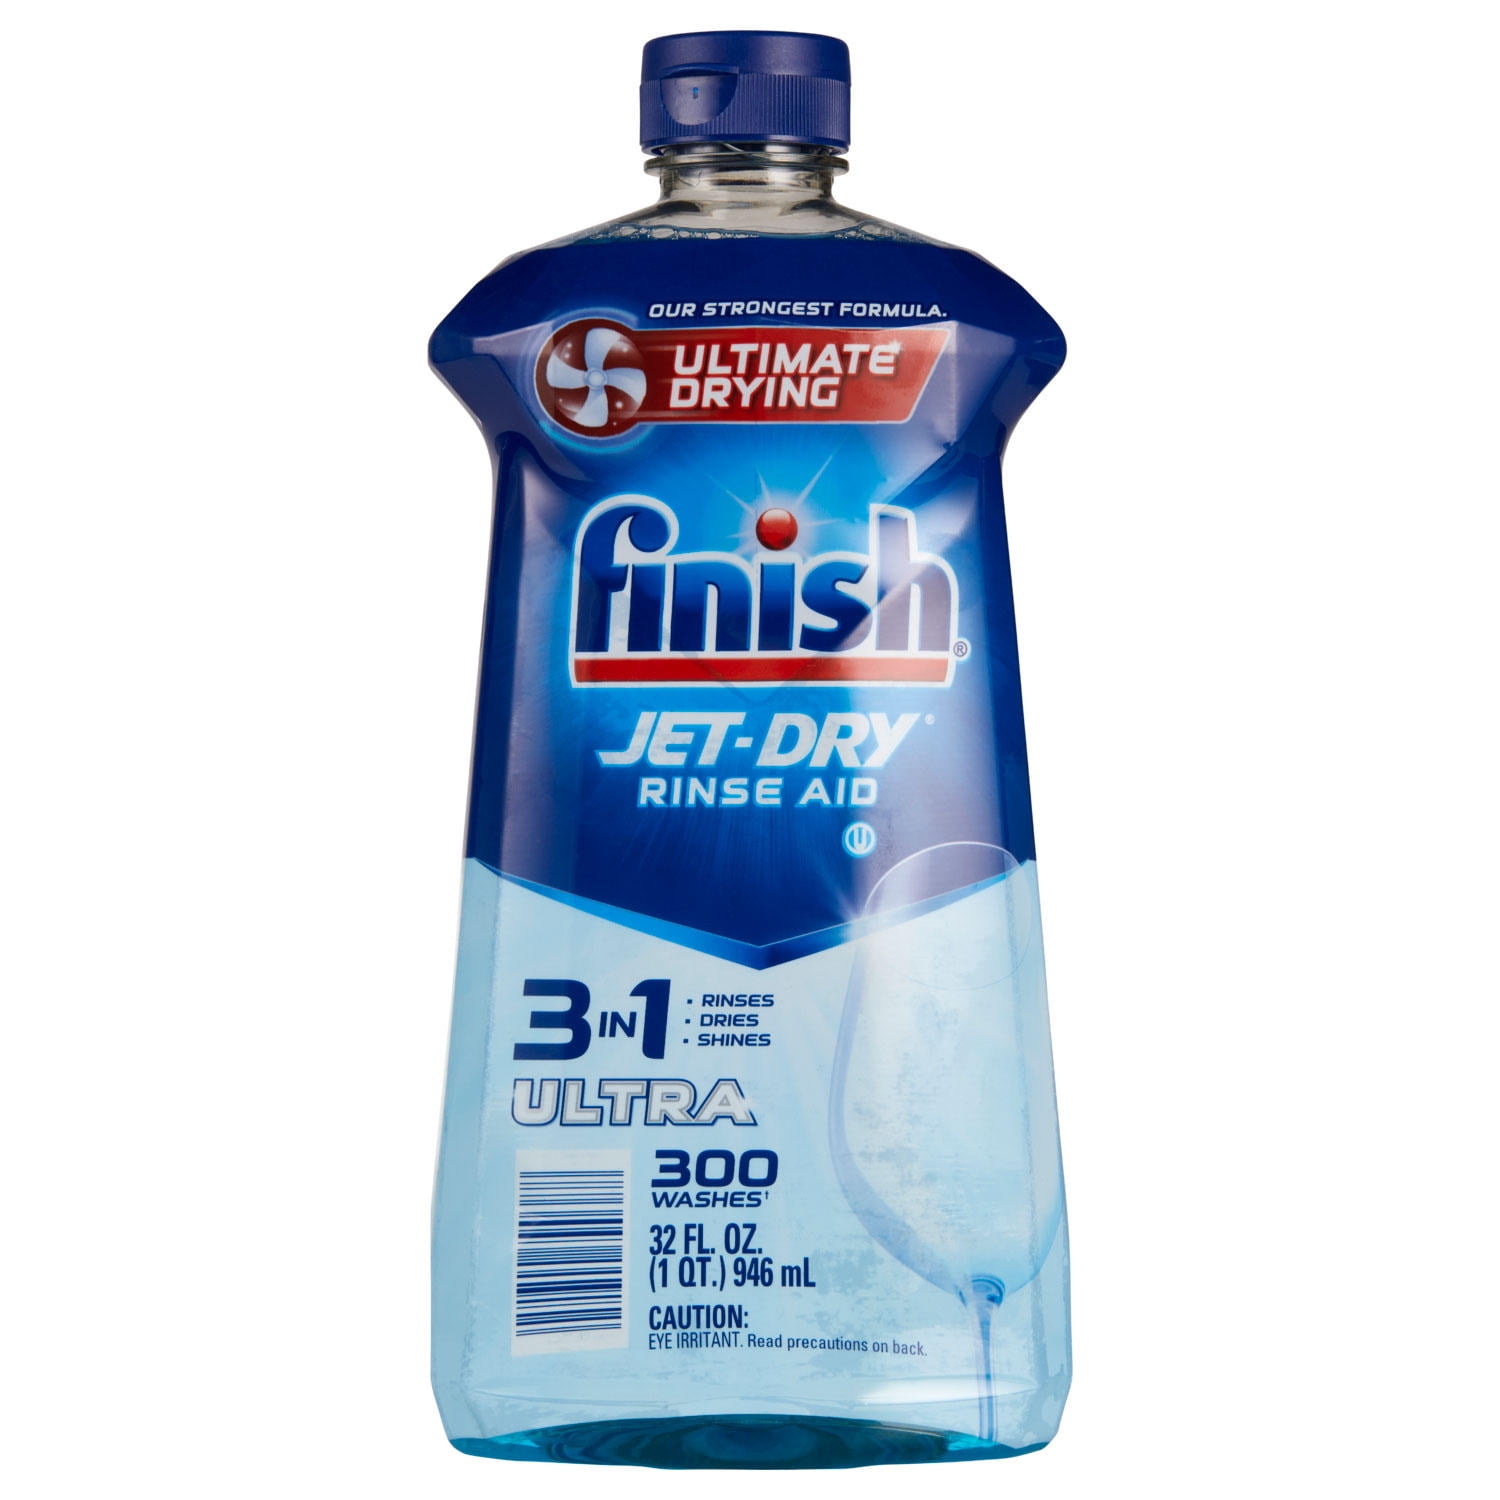 FINISH JET DRY Rinse Agent Review